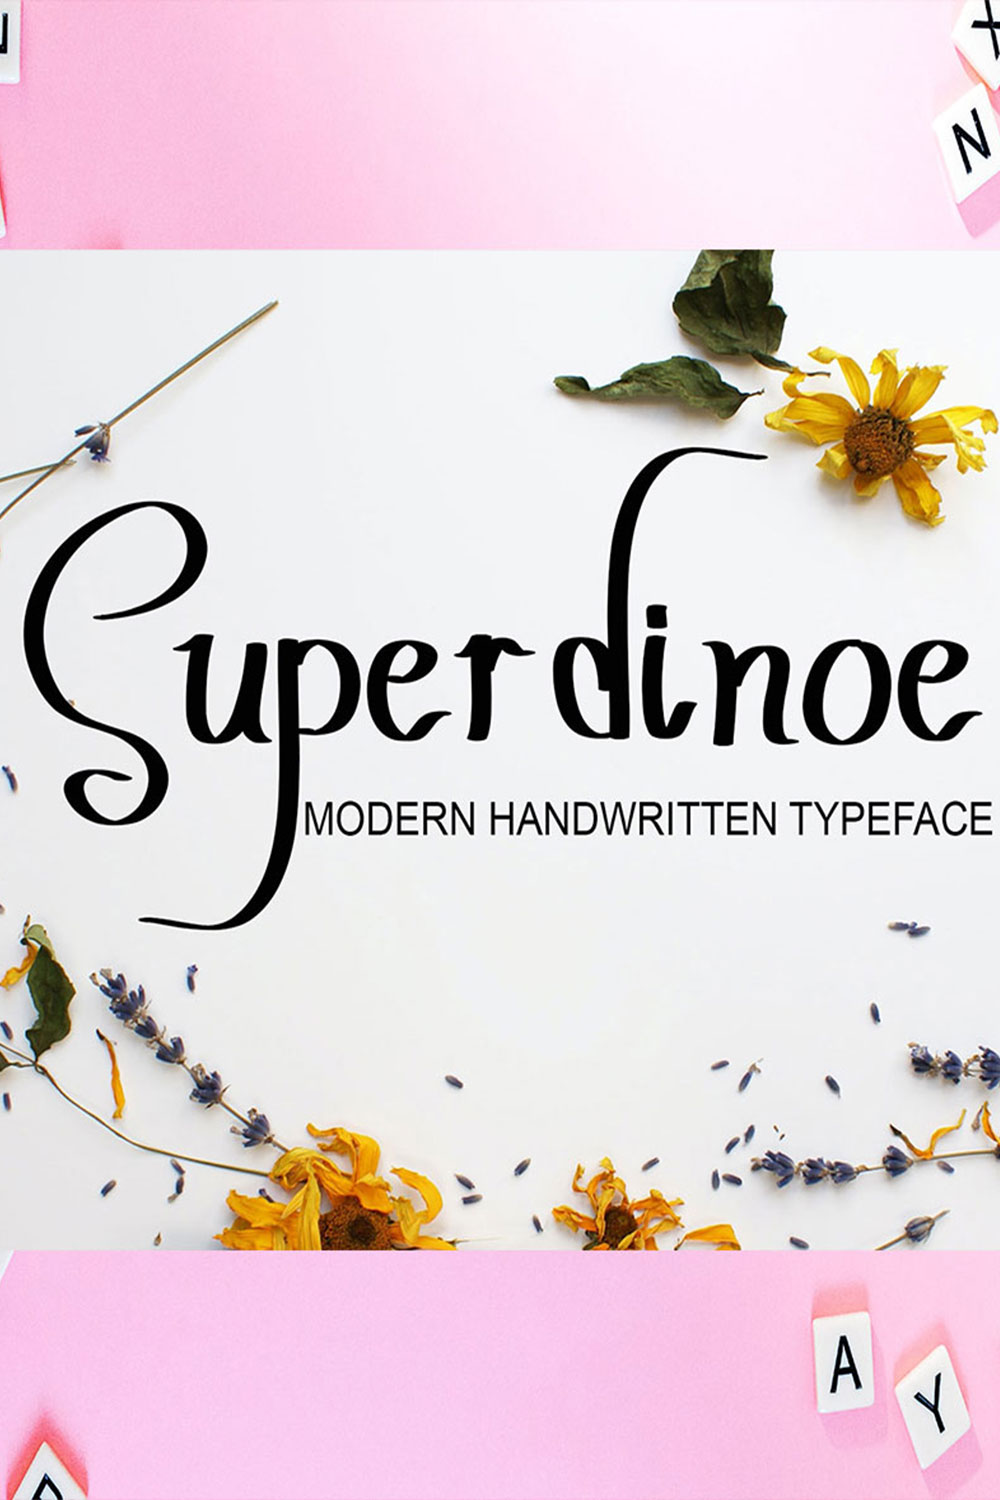 An image with text showing the irresistible Super Dinoe font.